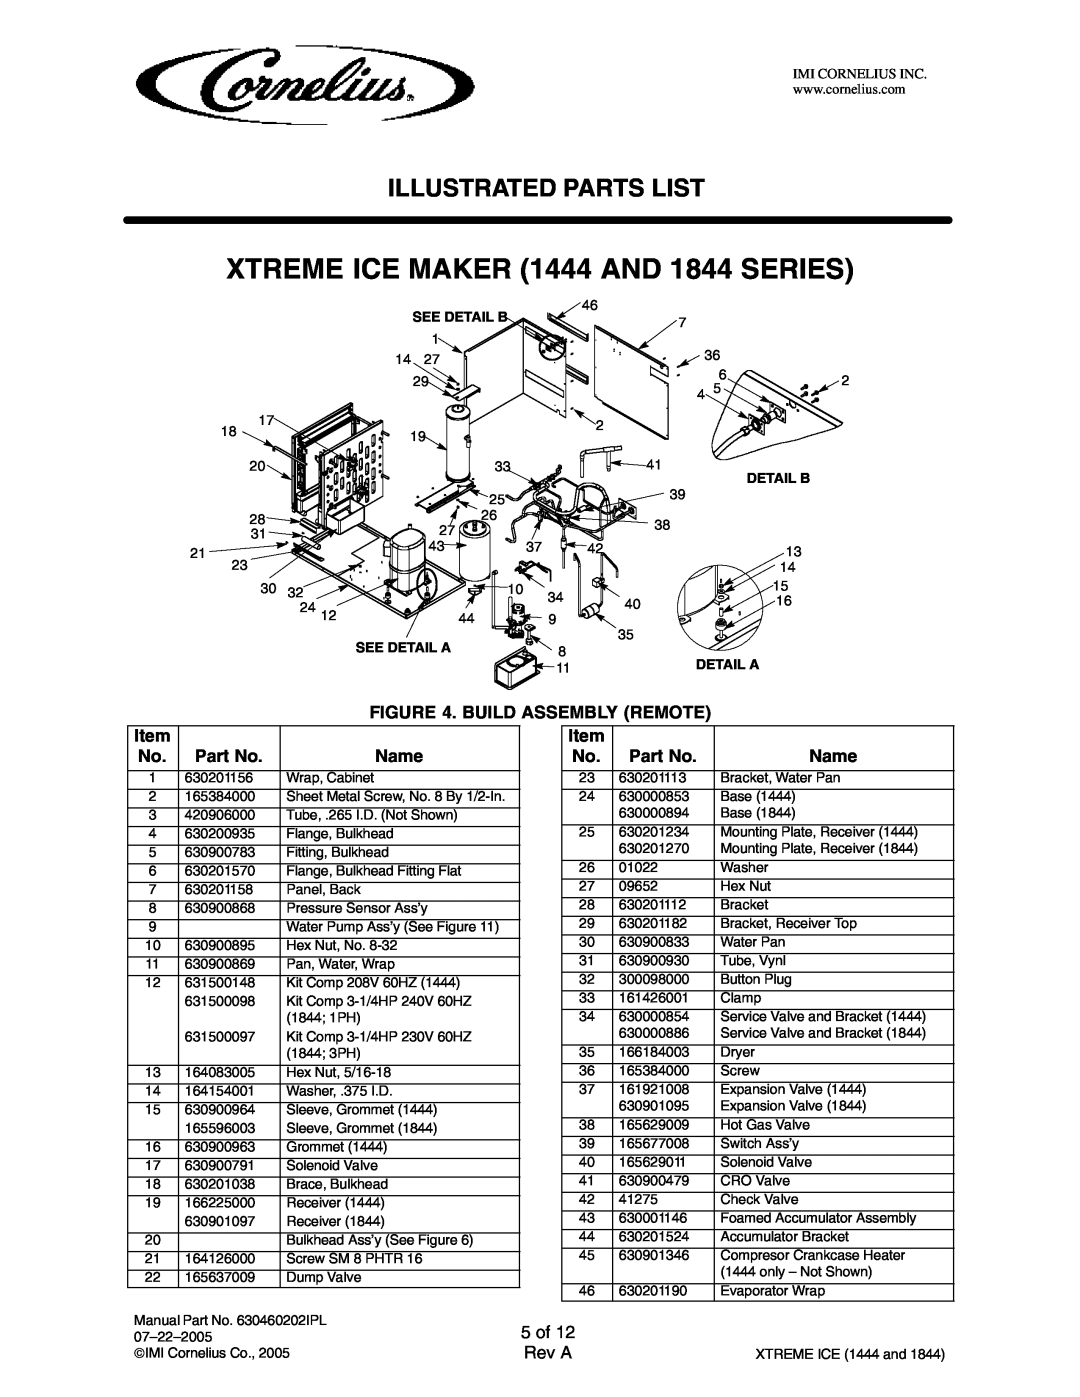 Cornelius 631818002, 631818052, 631814003, 631818050 manual 5 of, Detail B, Illustrated Parts List, Name, Rev A, See Detail A 